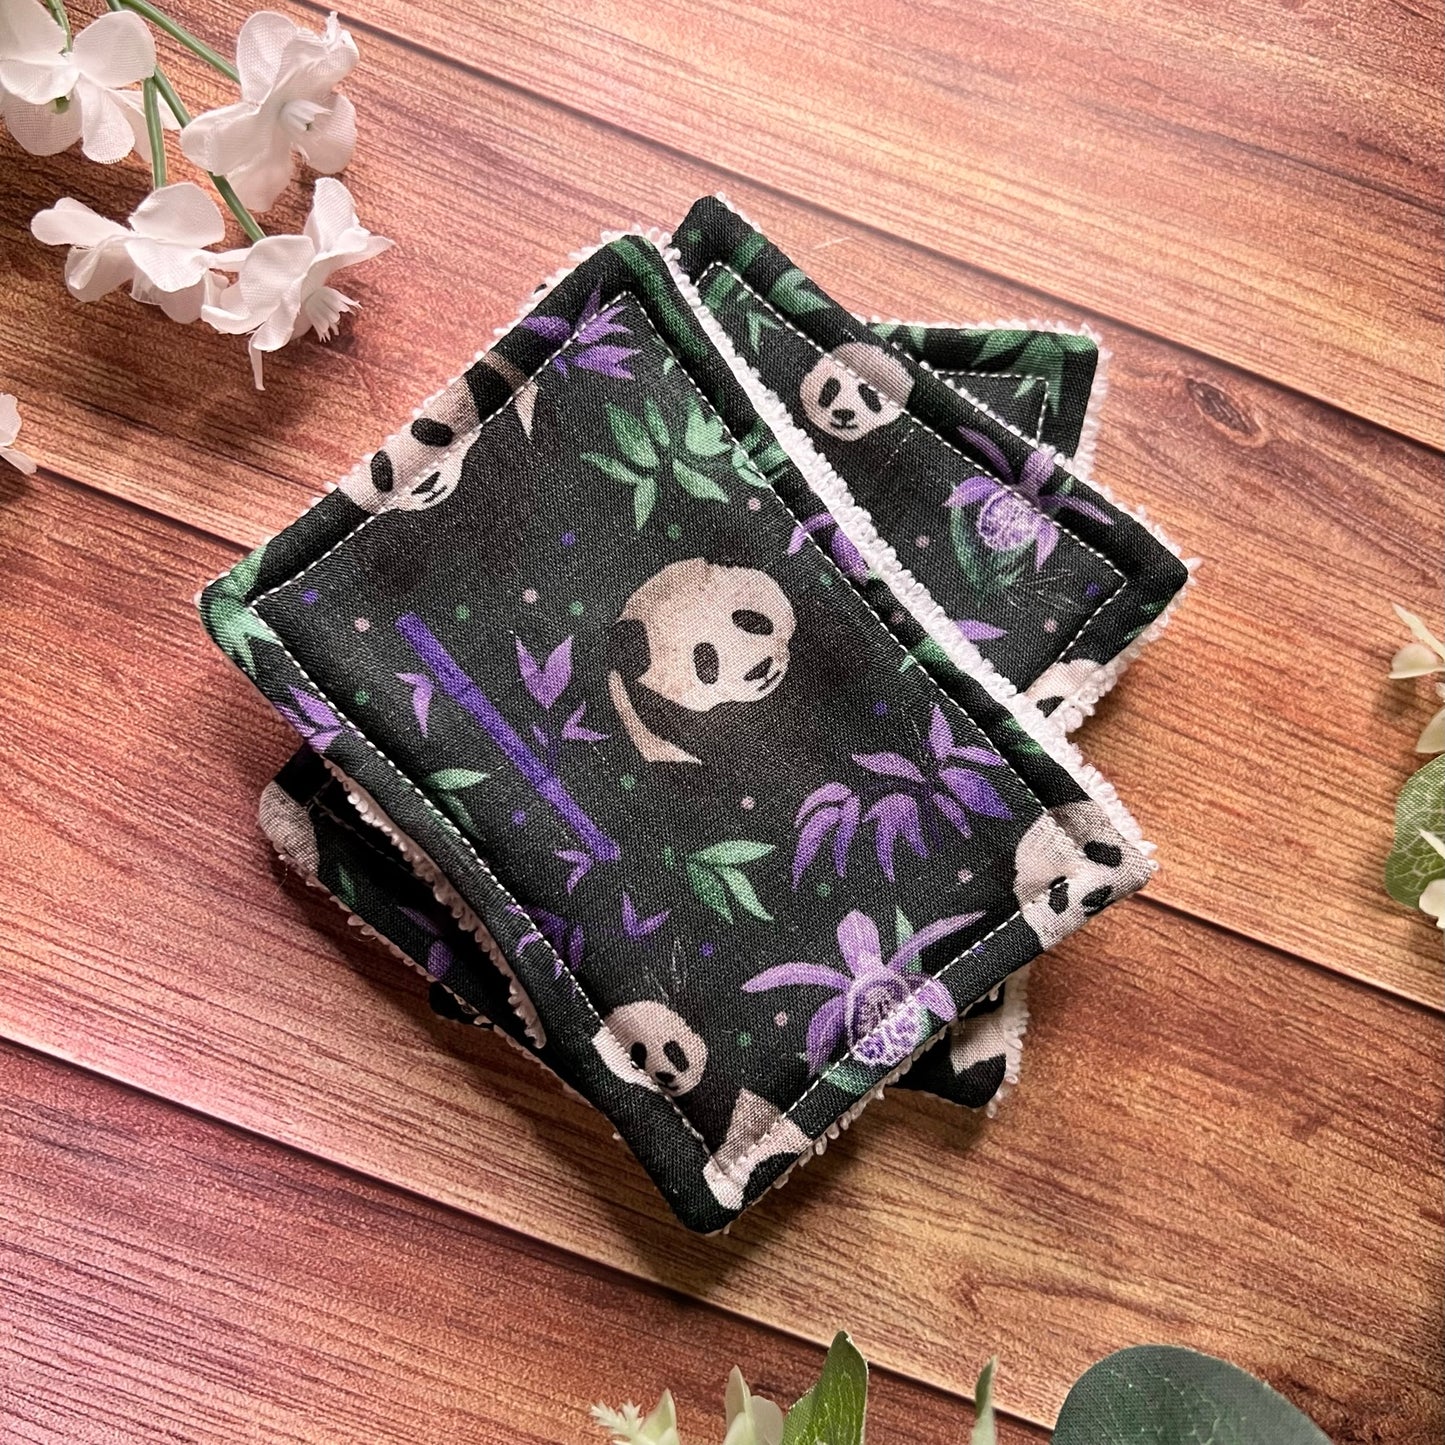 shop a panda gift for a girlfriend here with exfoliating face pads that will improve skin smoothness.